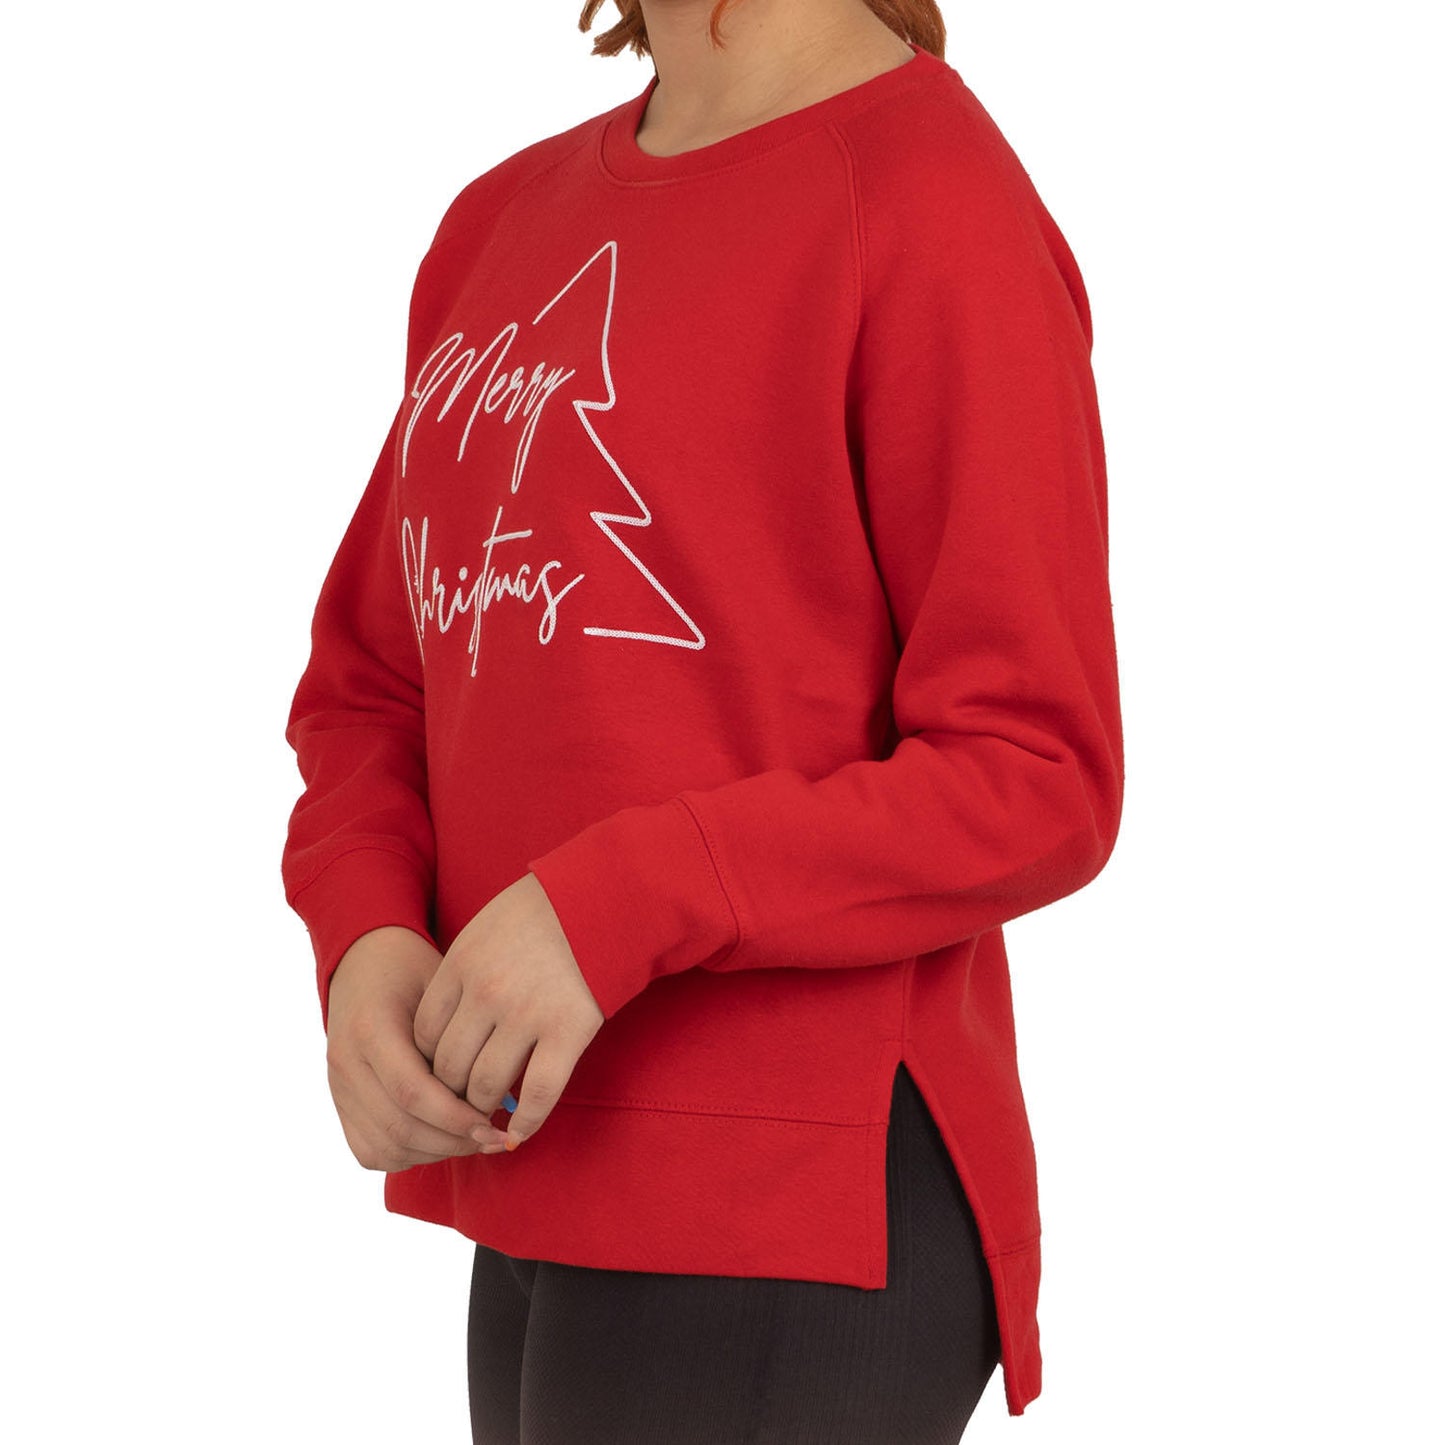 Royce Ladies Holiday Top. Red. Merry Christmas.